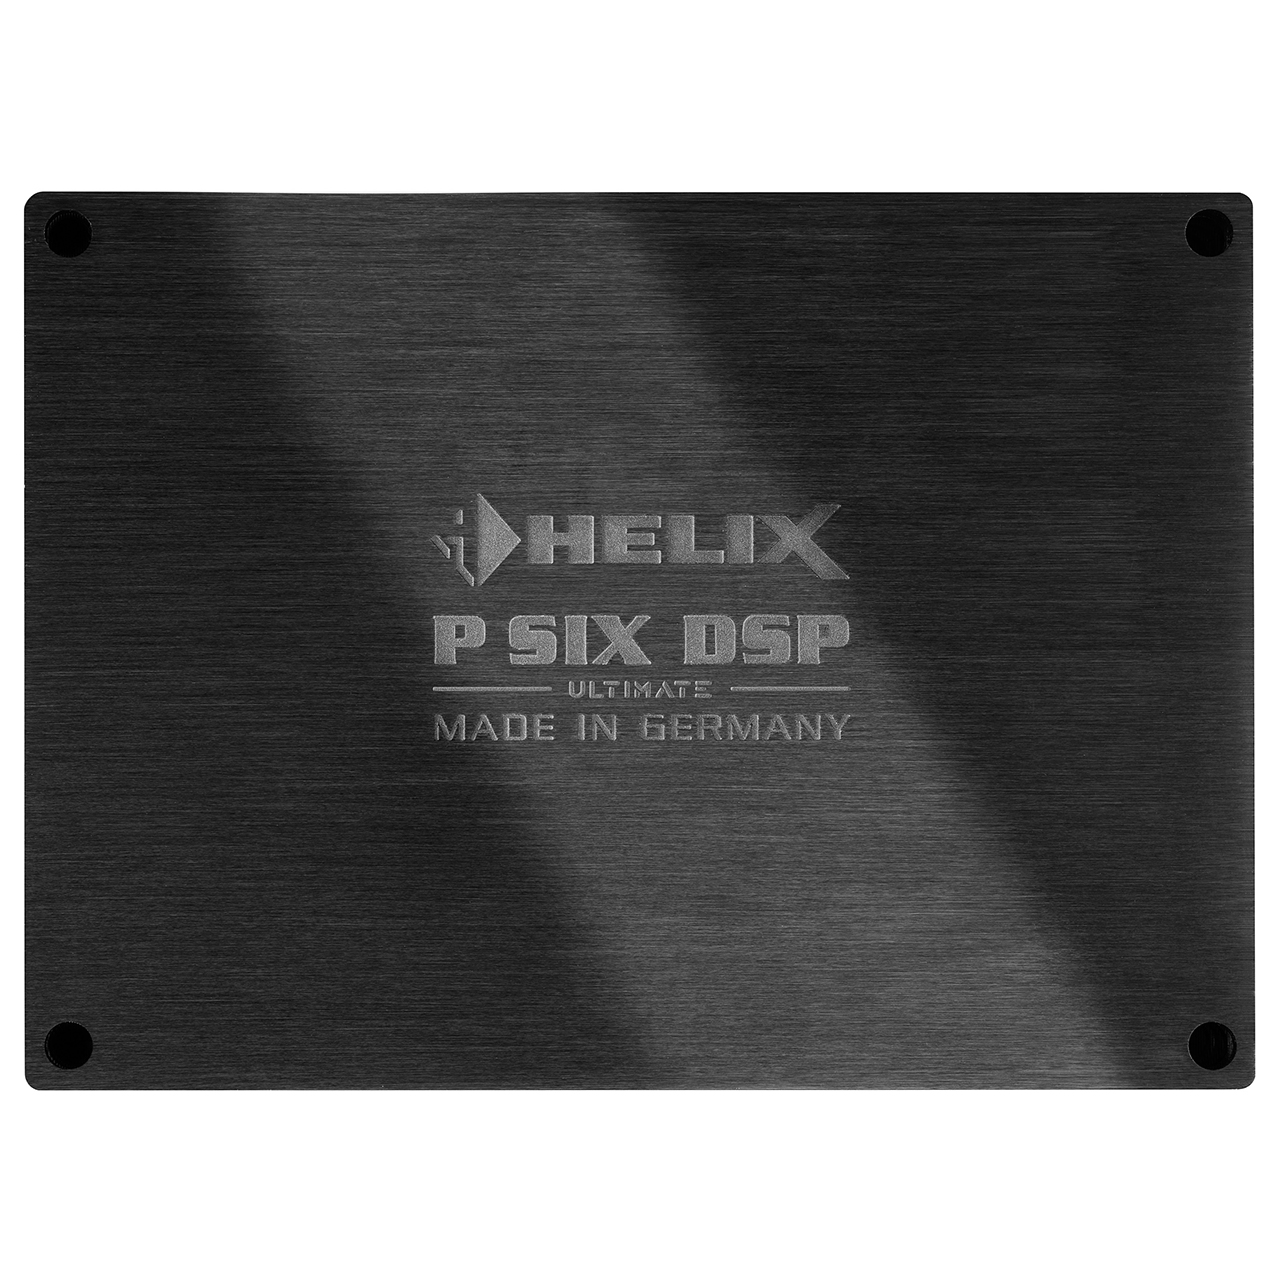 HELIX_P-SIX_DSP-ULTIMATE_1280x1280px_29-03-2022_134906.jpg